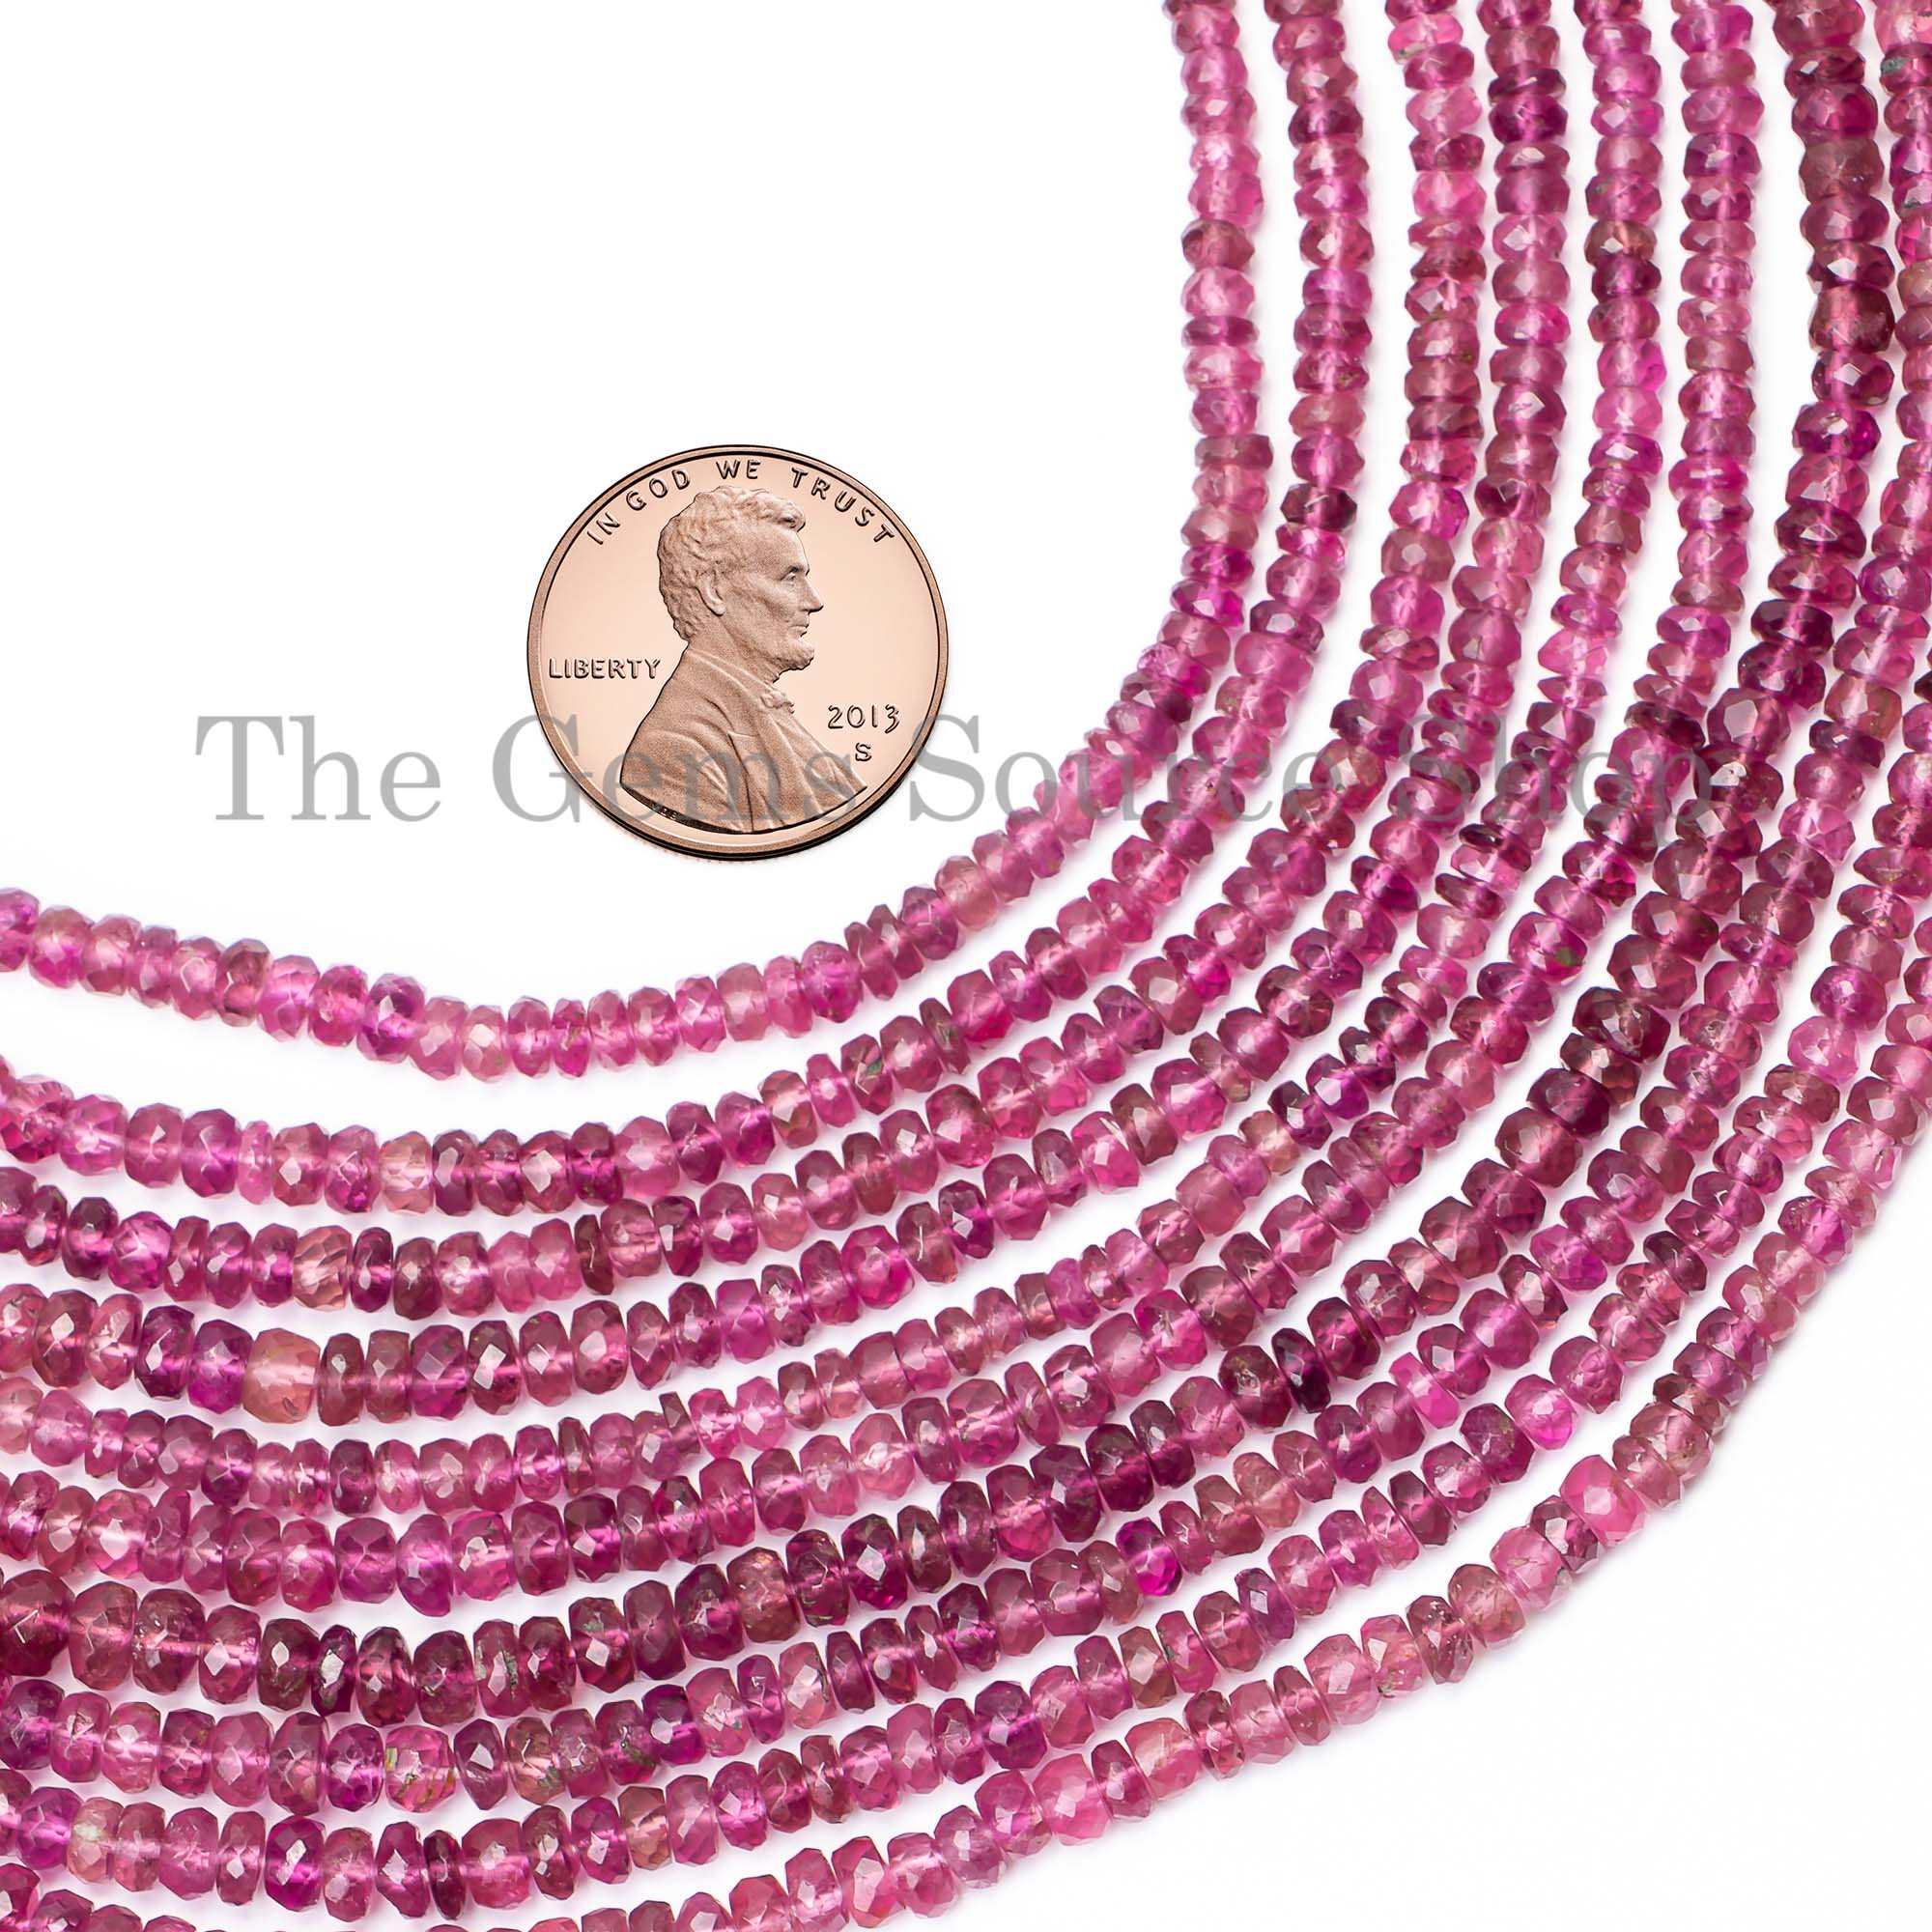 Rubellite Tourmaline Faceted Rondelle Beads, Rubellite Faceted Beads, 3-4mm Tourmaline Beads